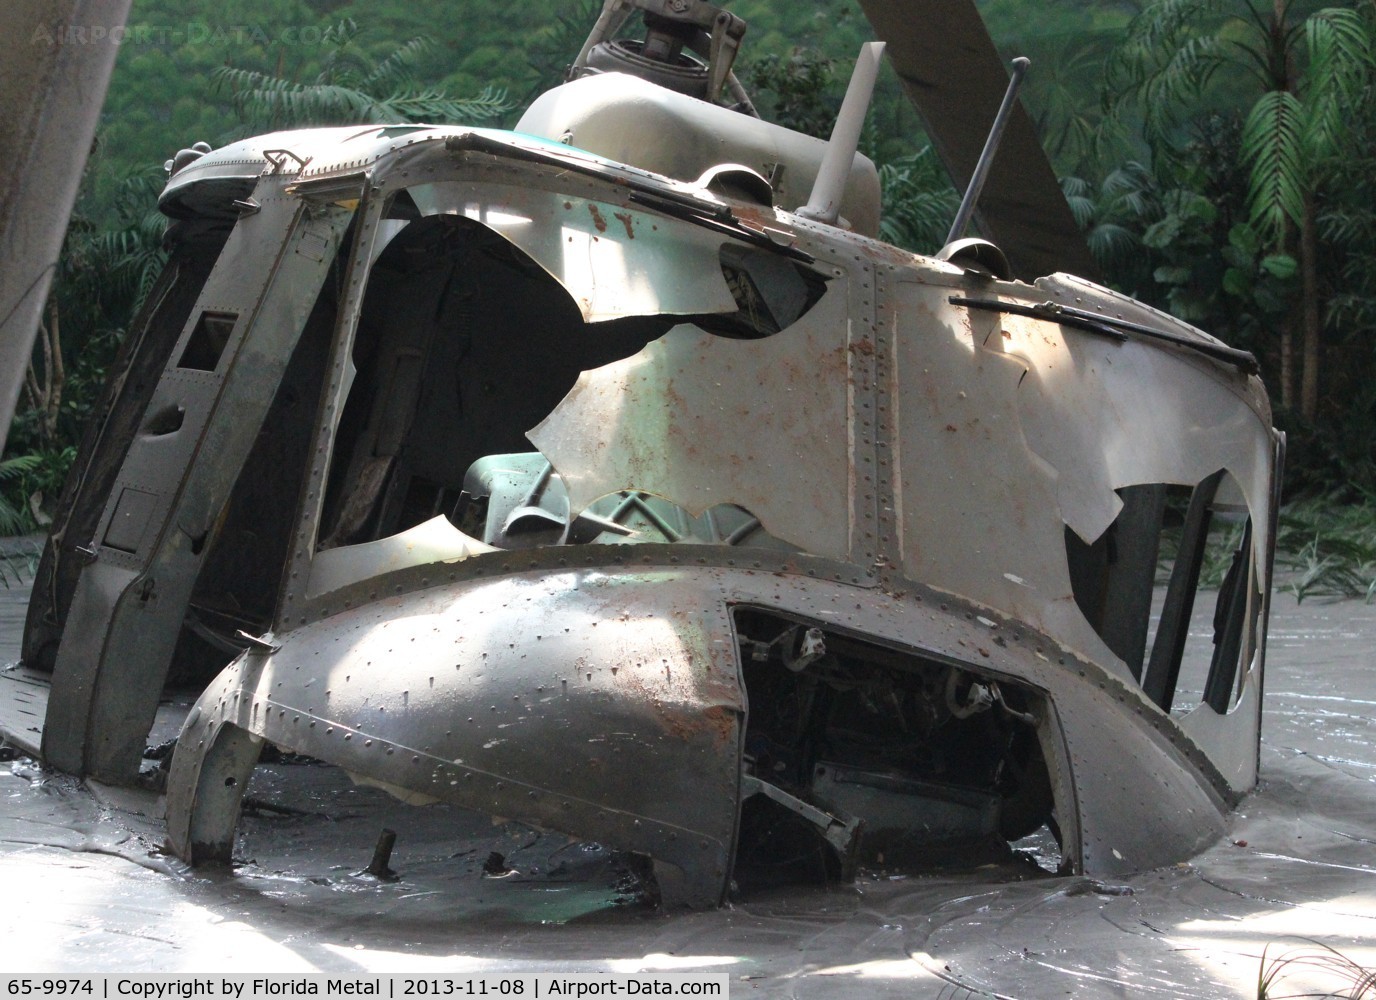 65-9974, 1965 Bell UH-1D Iroquois C/N 5018, UH-1D crash scene Ft. Rucker Army Aviation Museum